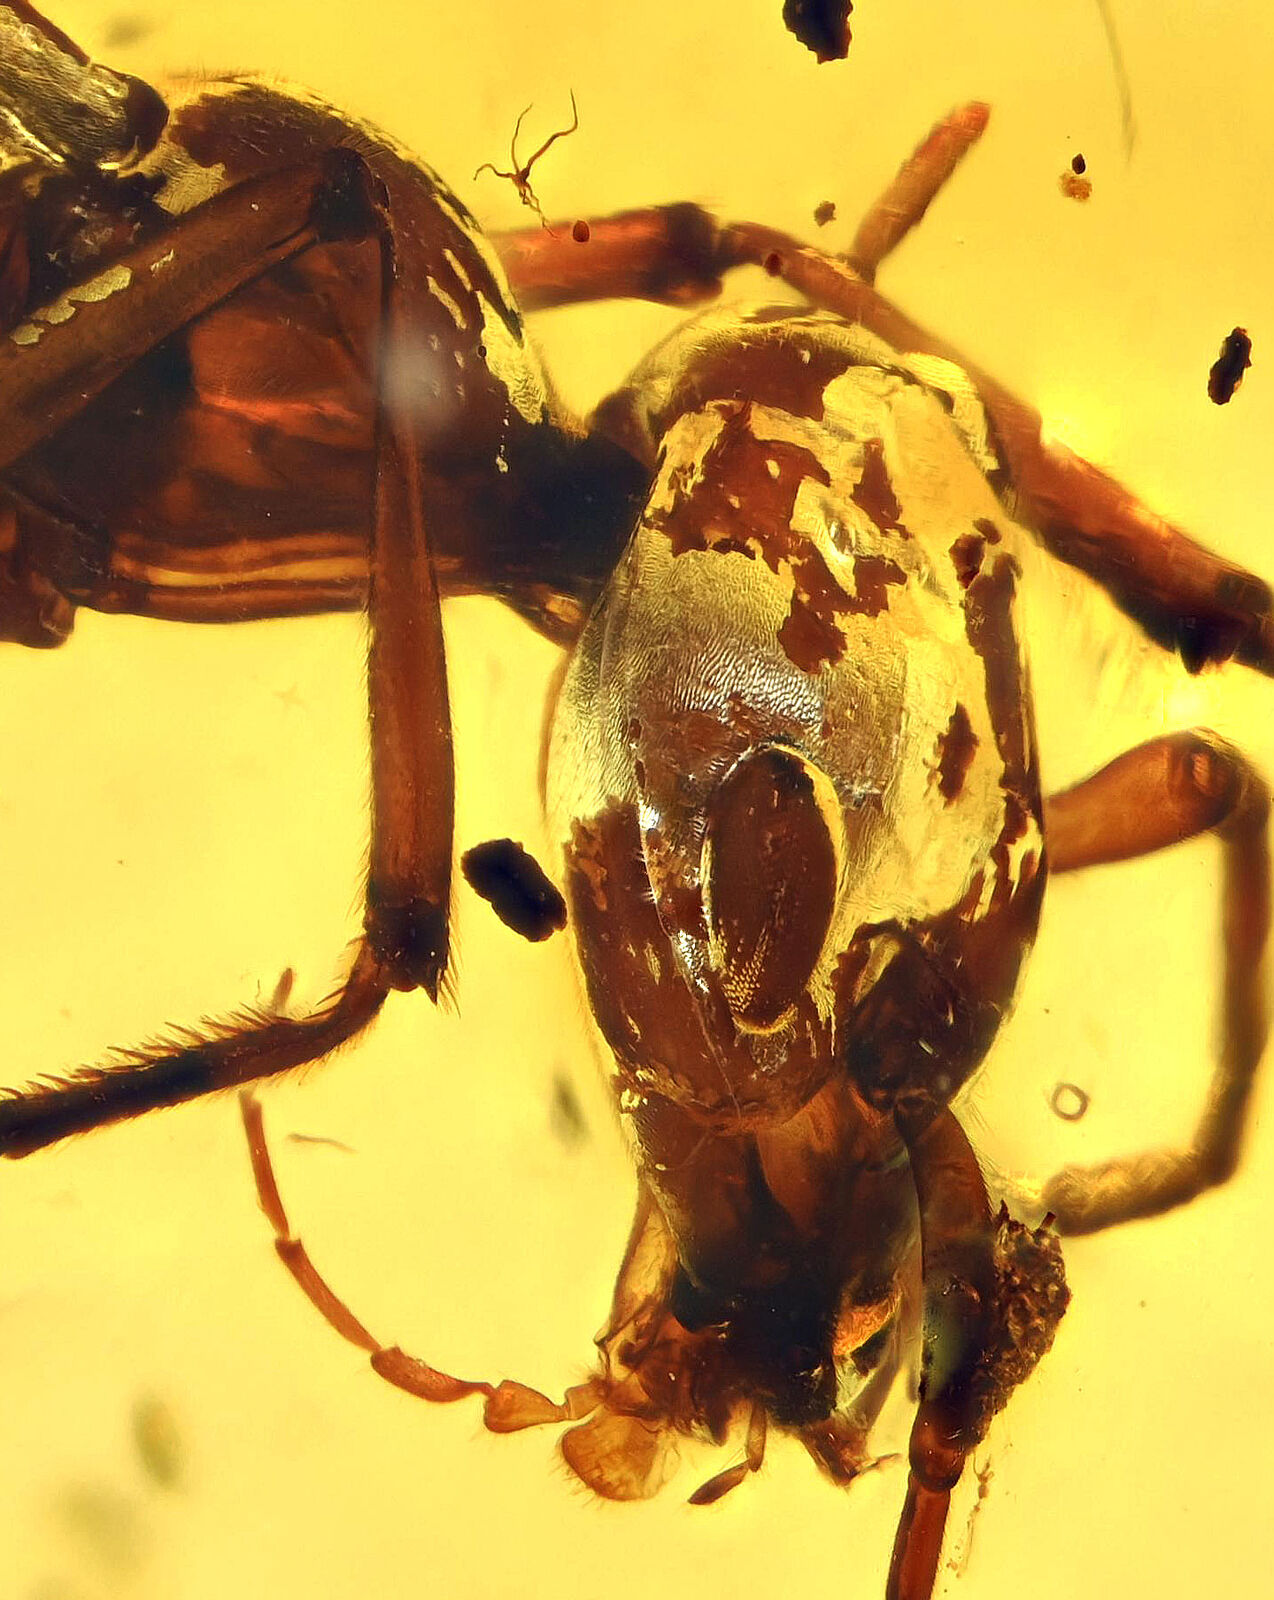 Detailed Aculeata, Formicidae (Ant), Fossil inclusion in Burmese Amber